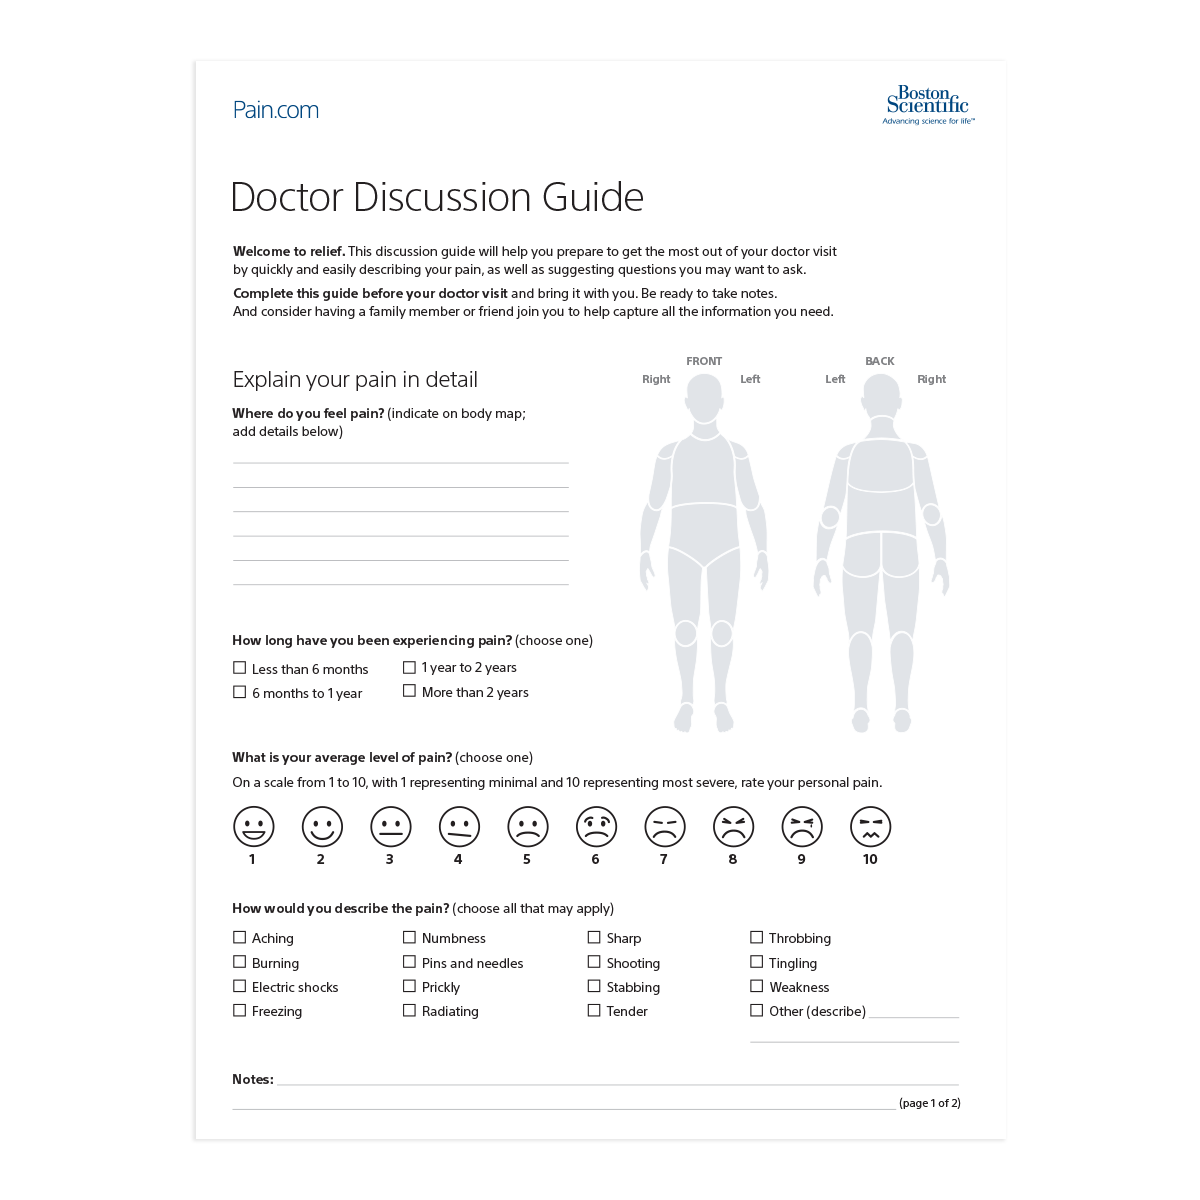 The Pain.com Doctor Discussion Guide.